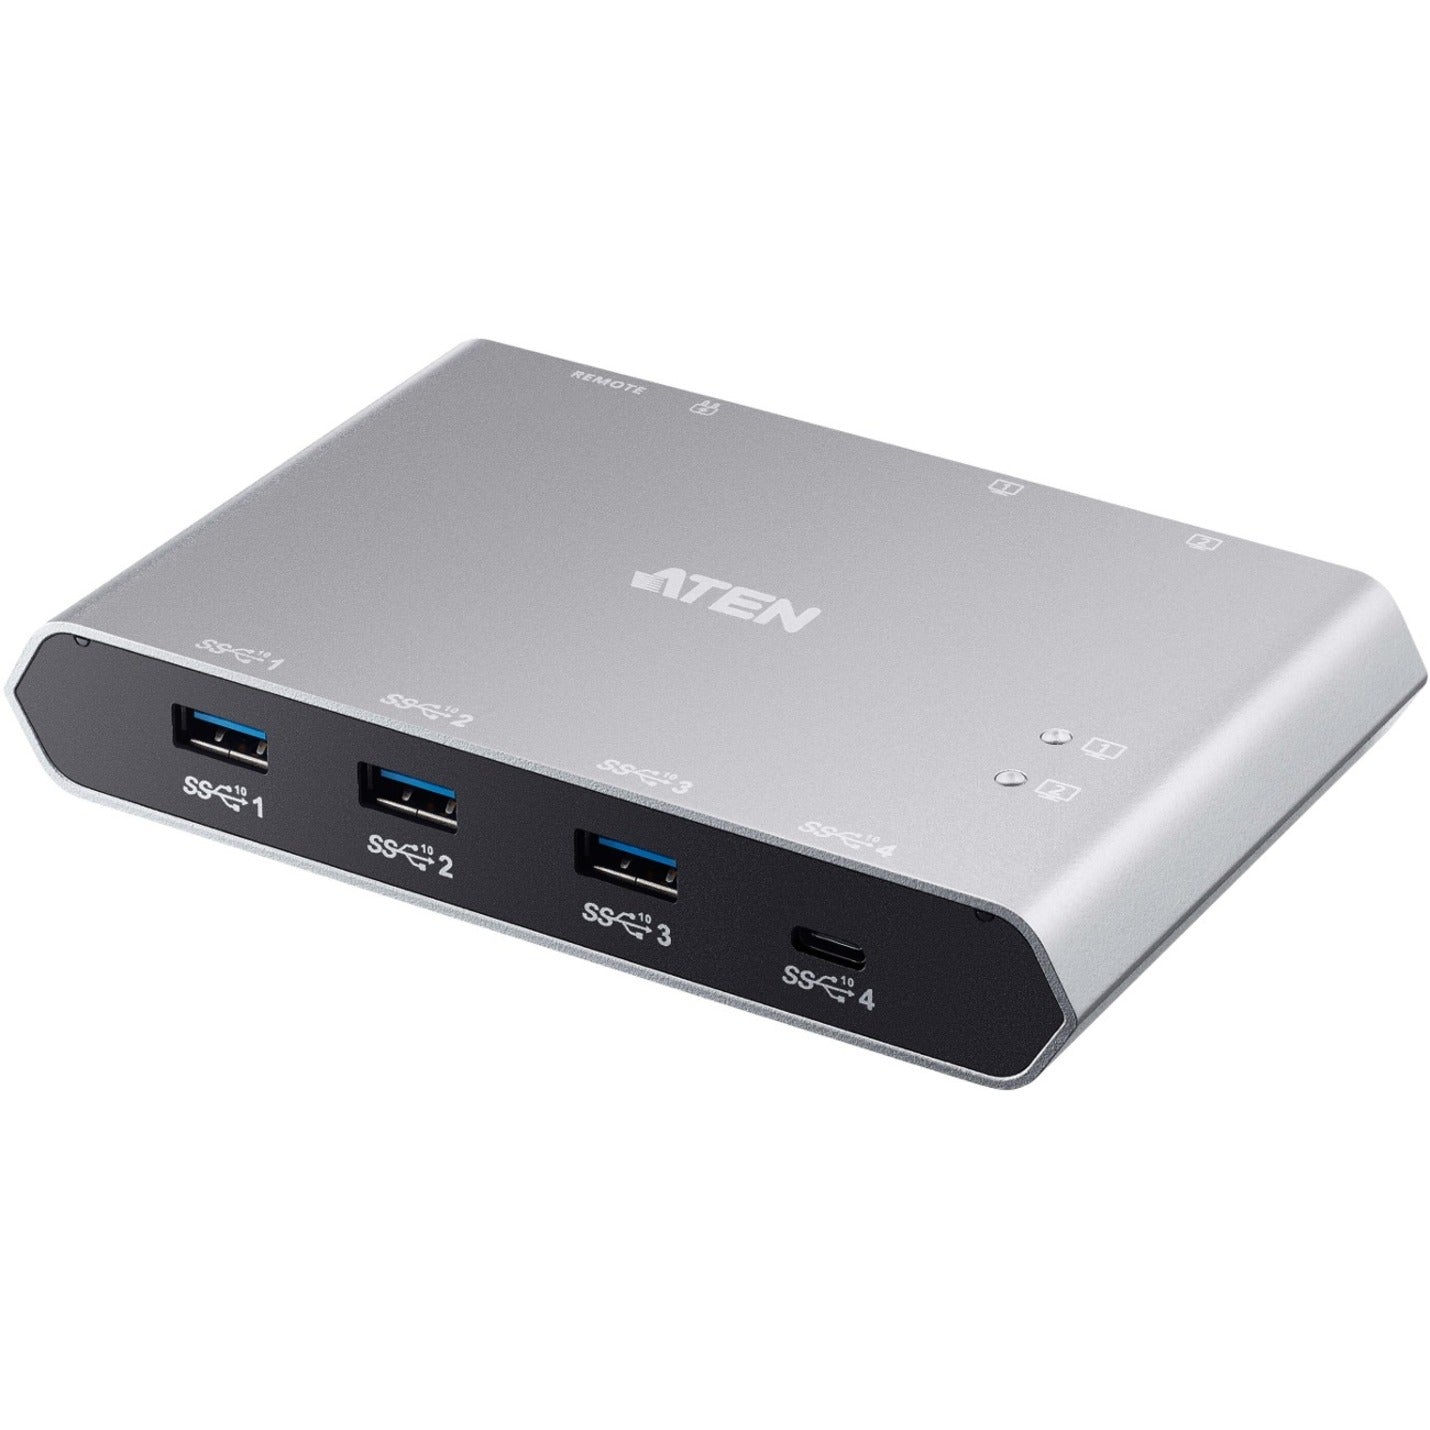 ATEN US3342 2-Port USB-C Gen 2 Sharing Switch with Power Pass-through, USB Hub for Mac and PC